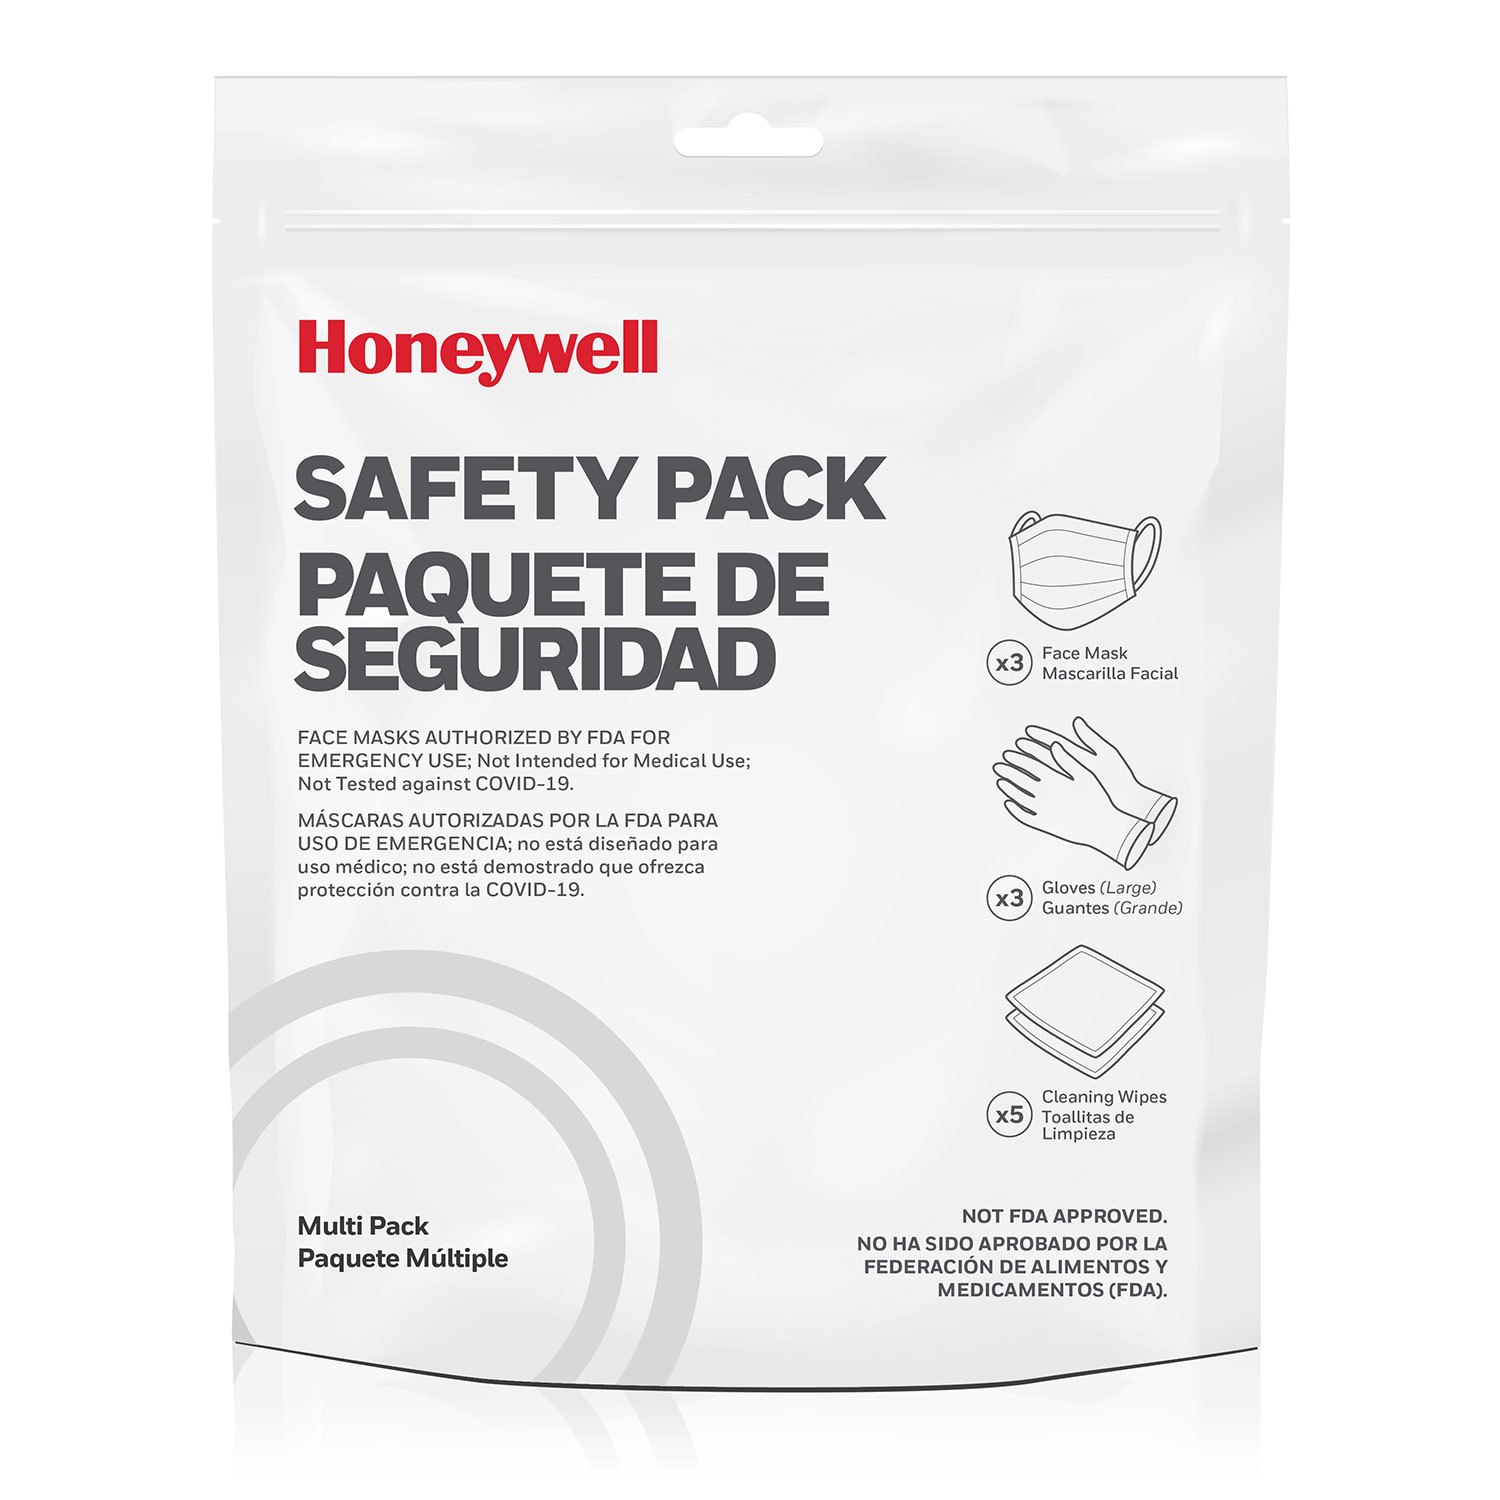 Honeywell Safety Multi Pack - 3 Face Masks, 3 Gloves and 5 Cleaning Wipes - RWS-50101